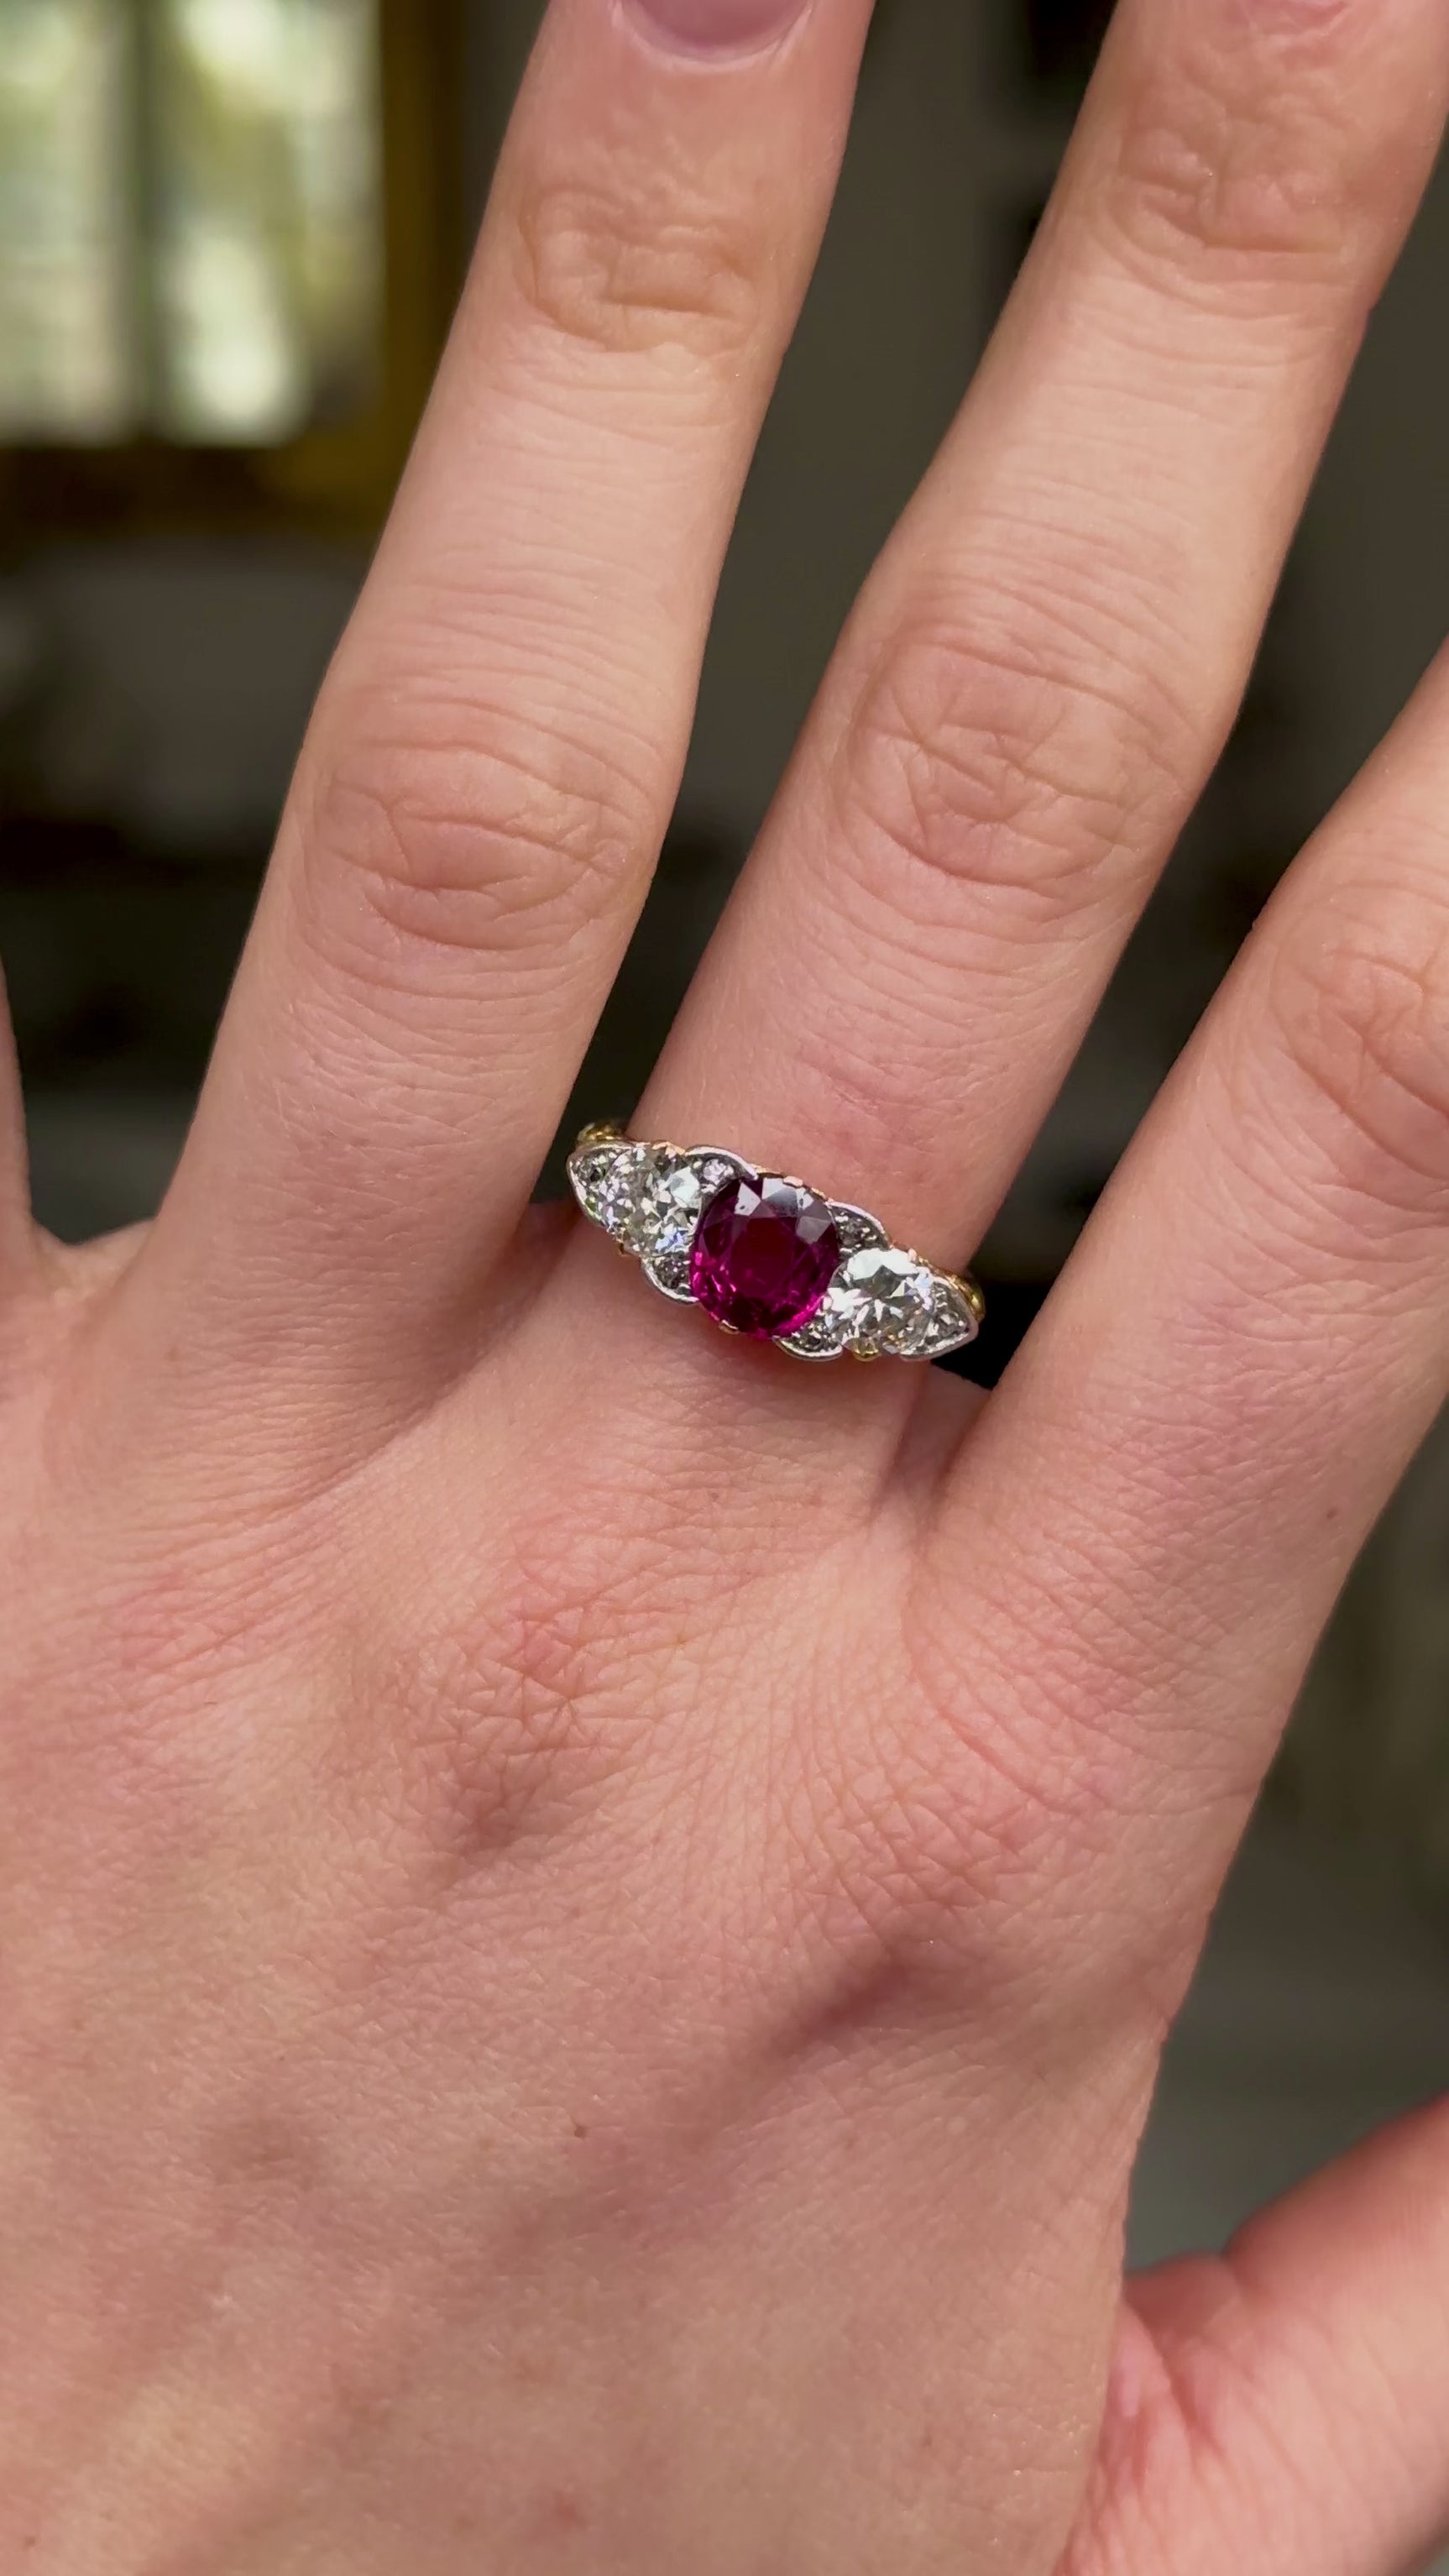 Antique, Edwardian Three Stone Ruby and Diamond Engagement Ring, worn on hand and rotated to give perspective.